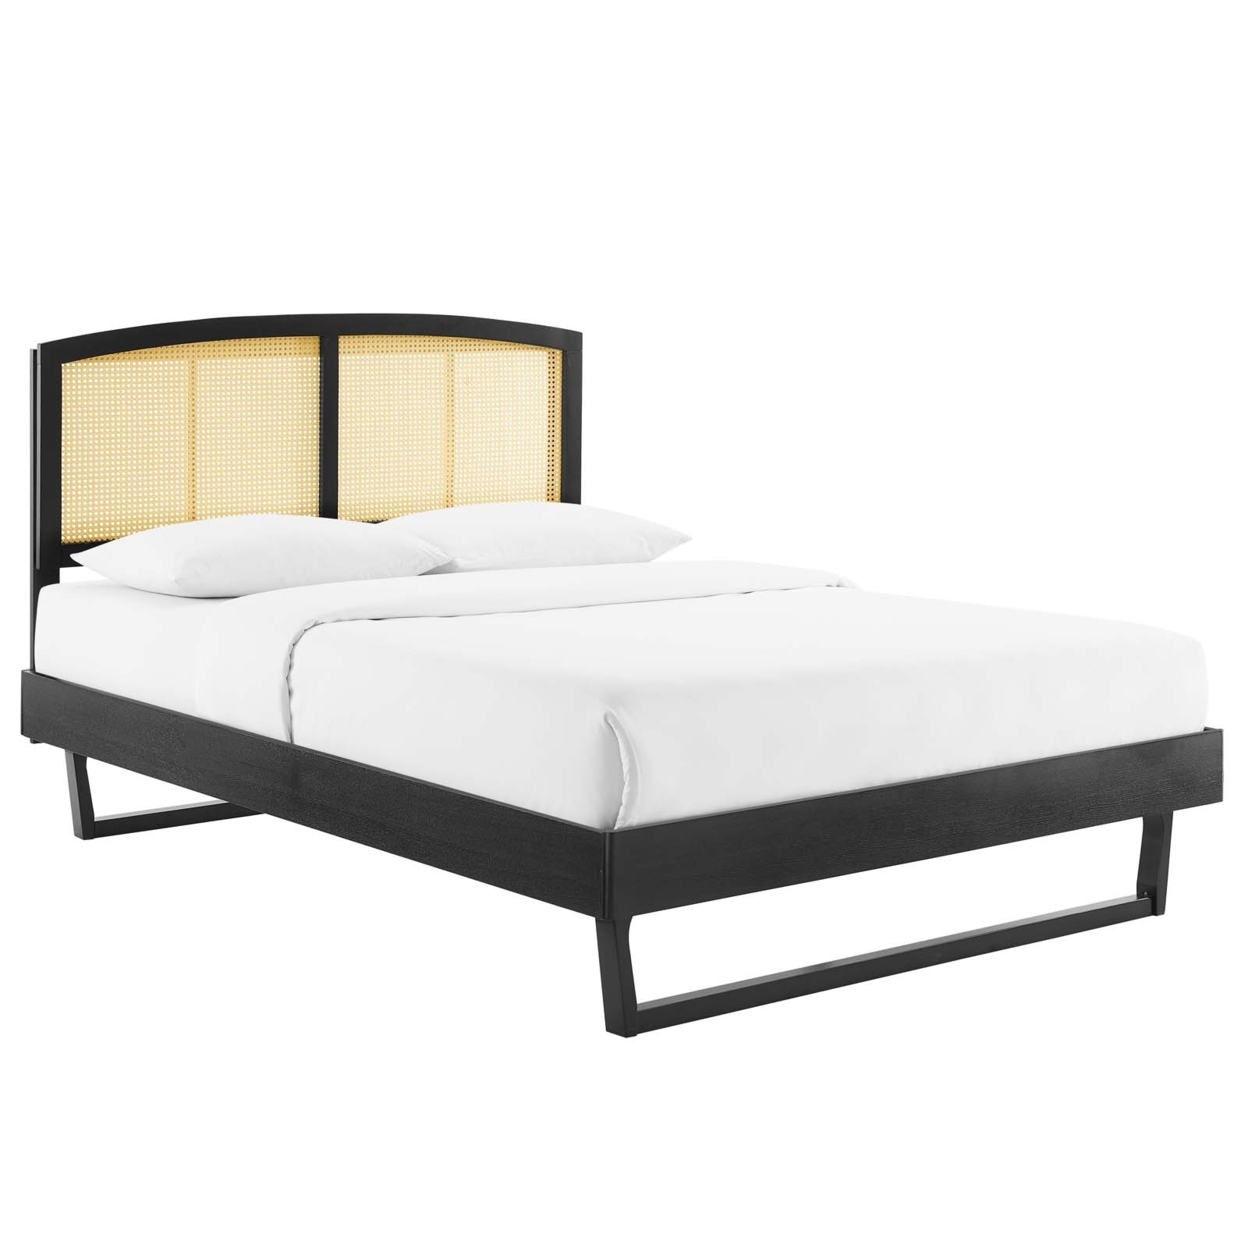 Sierra Cane And Wood Full Platform Bed With Angular Legs, Black